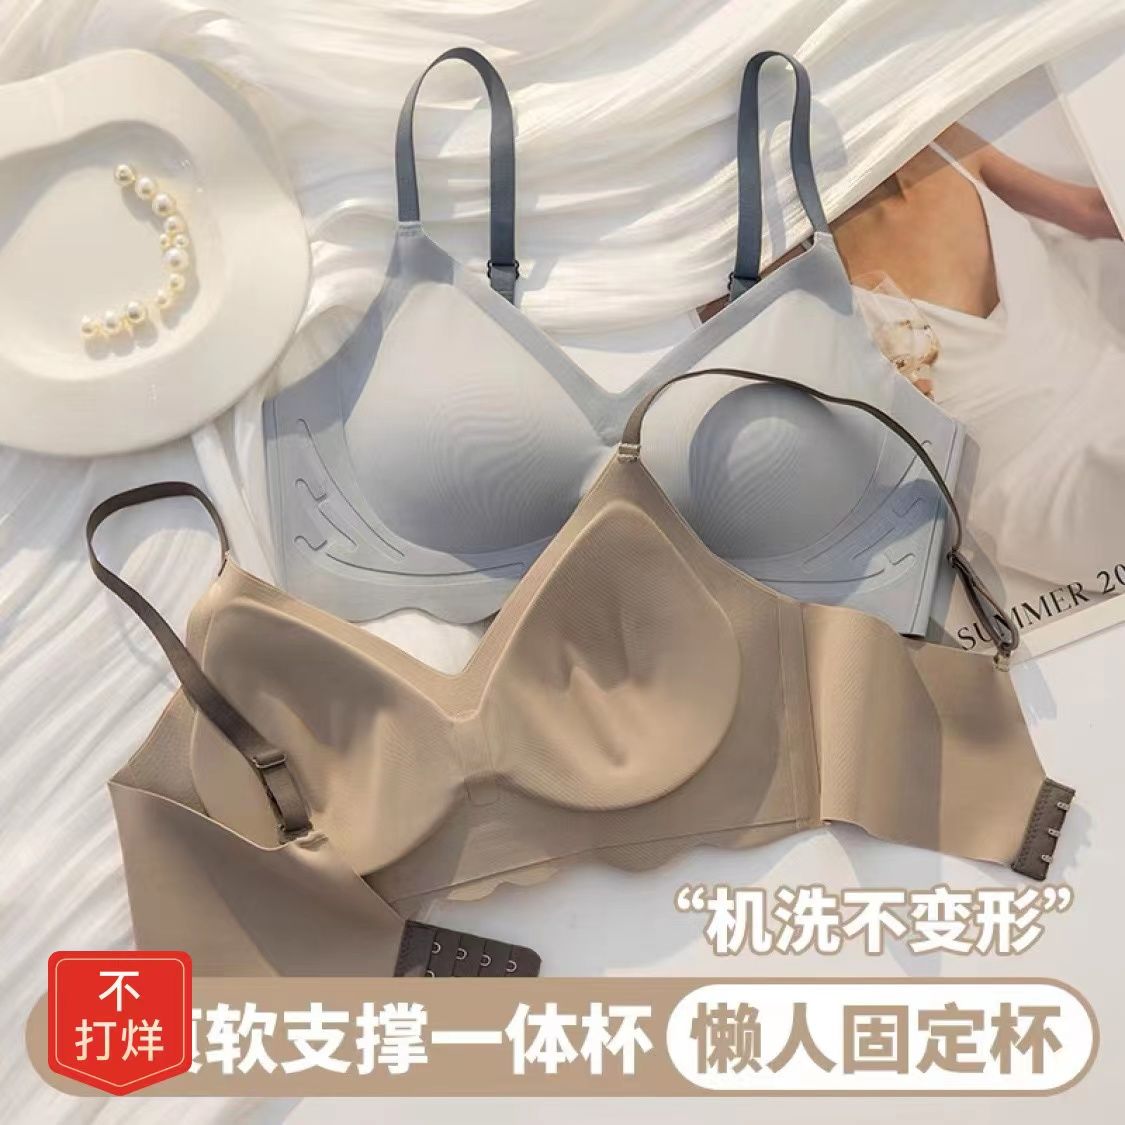 Cloud sense seamless underwear women's small chest gathers to show big and comfortable thin section one-piece fixed cup sports girls' bra